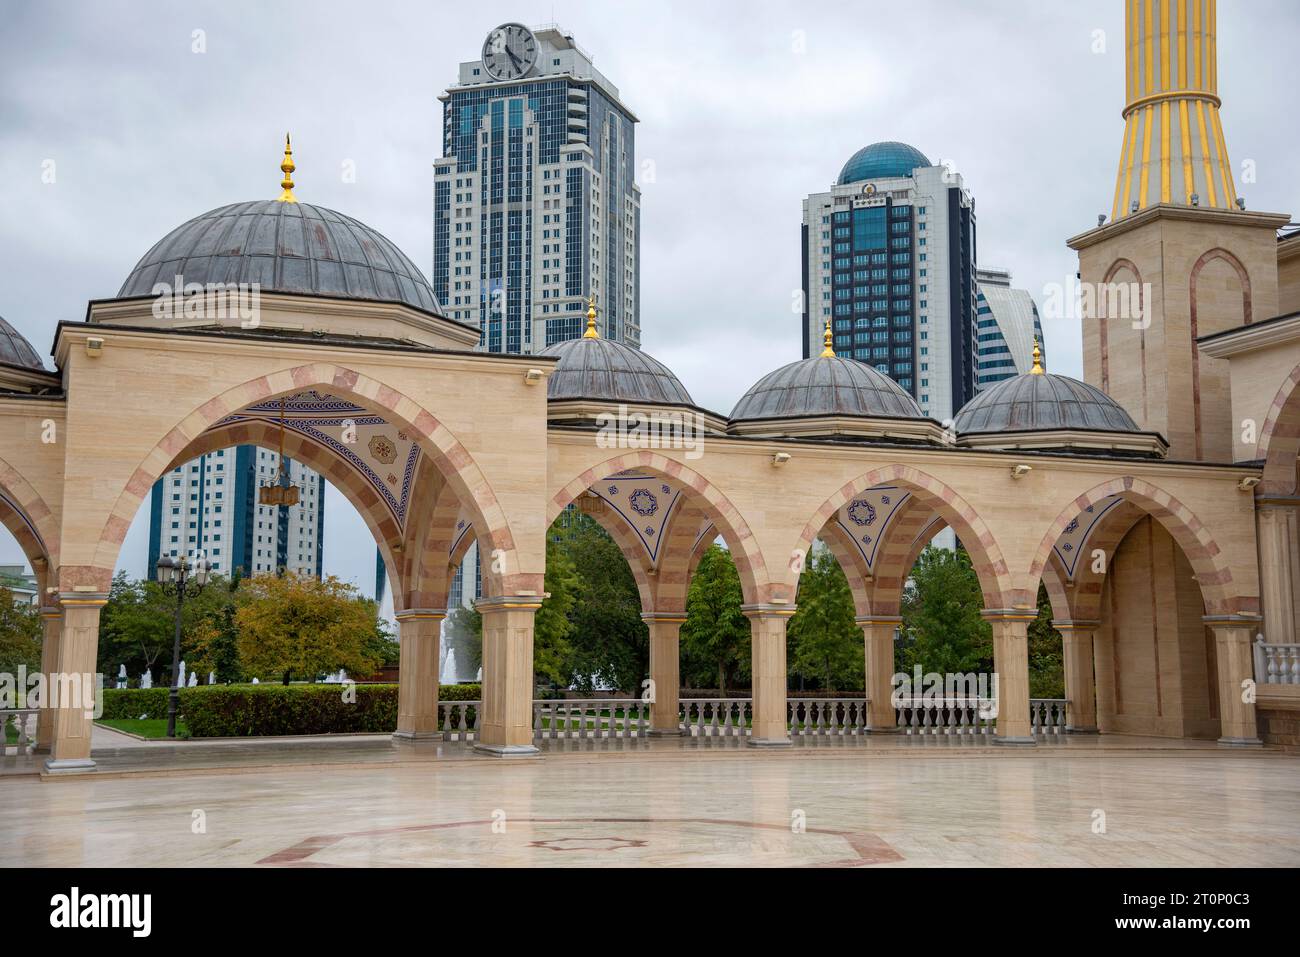 GROZNY, RUSSIA - SEPTEMBER 30, 2021: The courtyard of the Heart of Chechnya Mosque against the background of the Grozny City complex, Chechen Republic Stock Photo